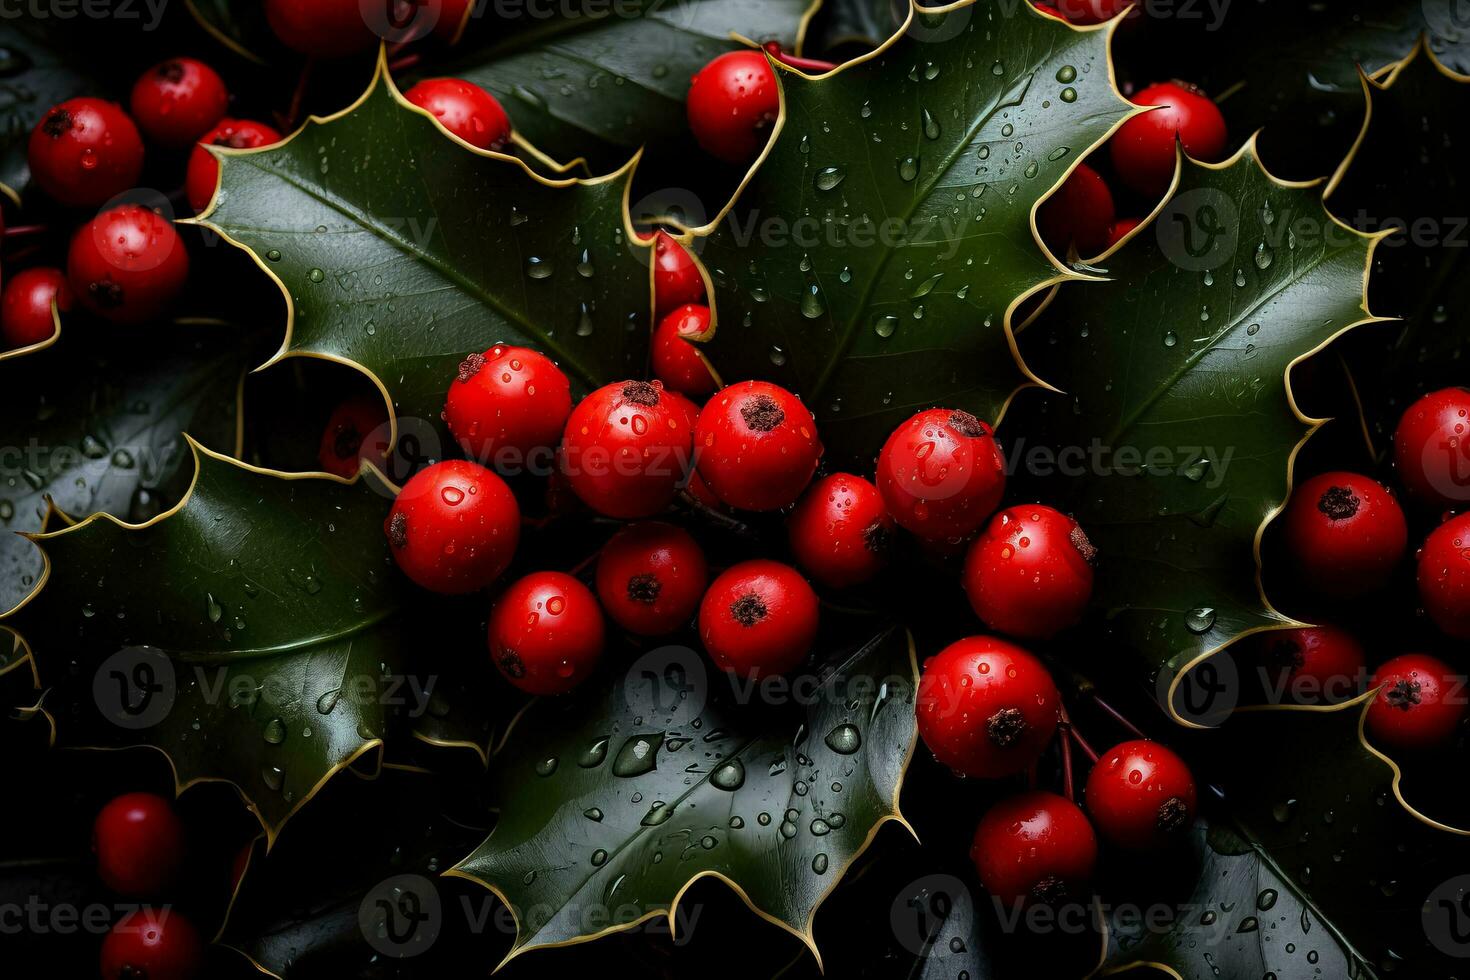 Glistening holly leaves create a striking low relief against a backdrop of festive red hues photo